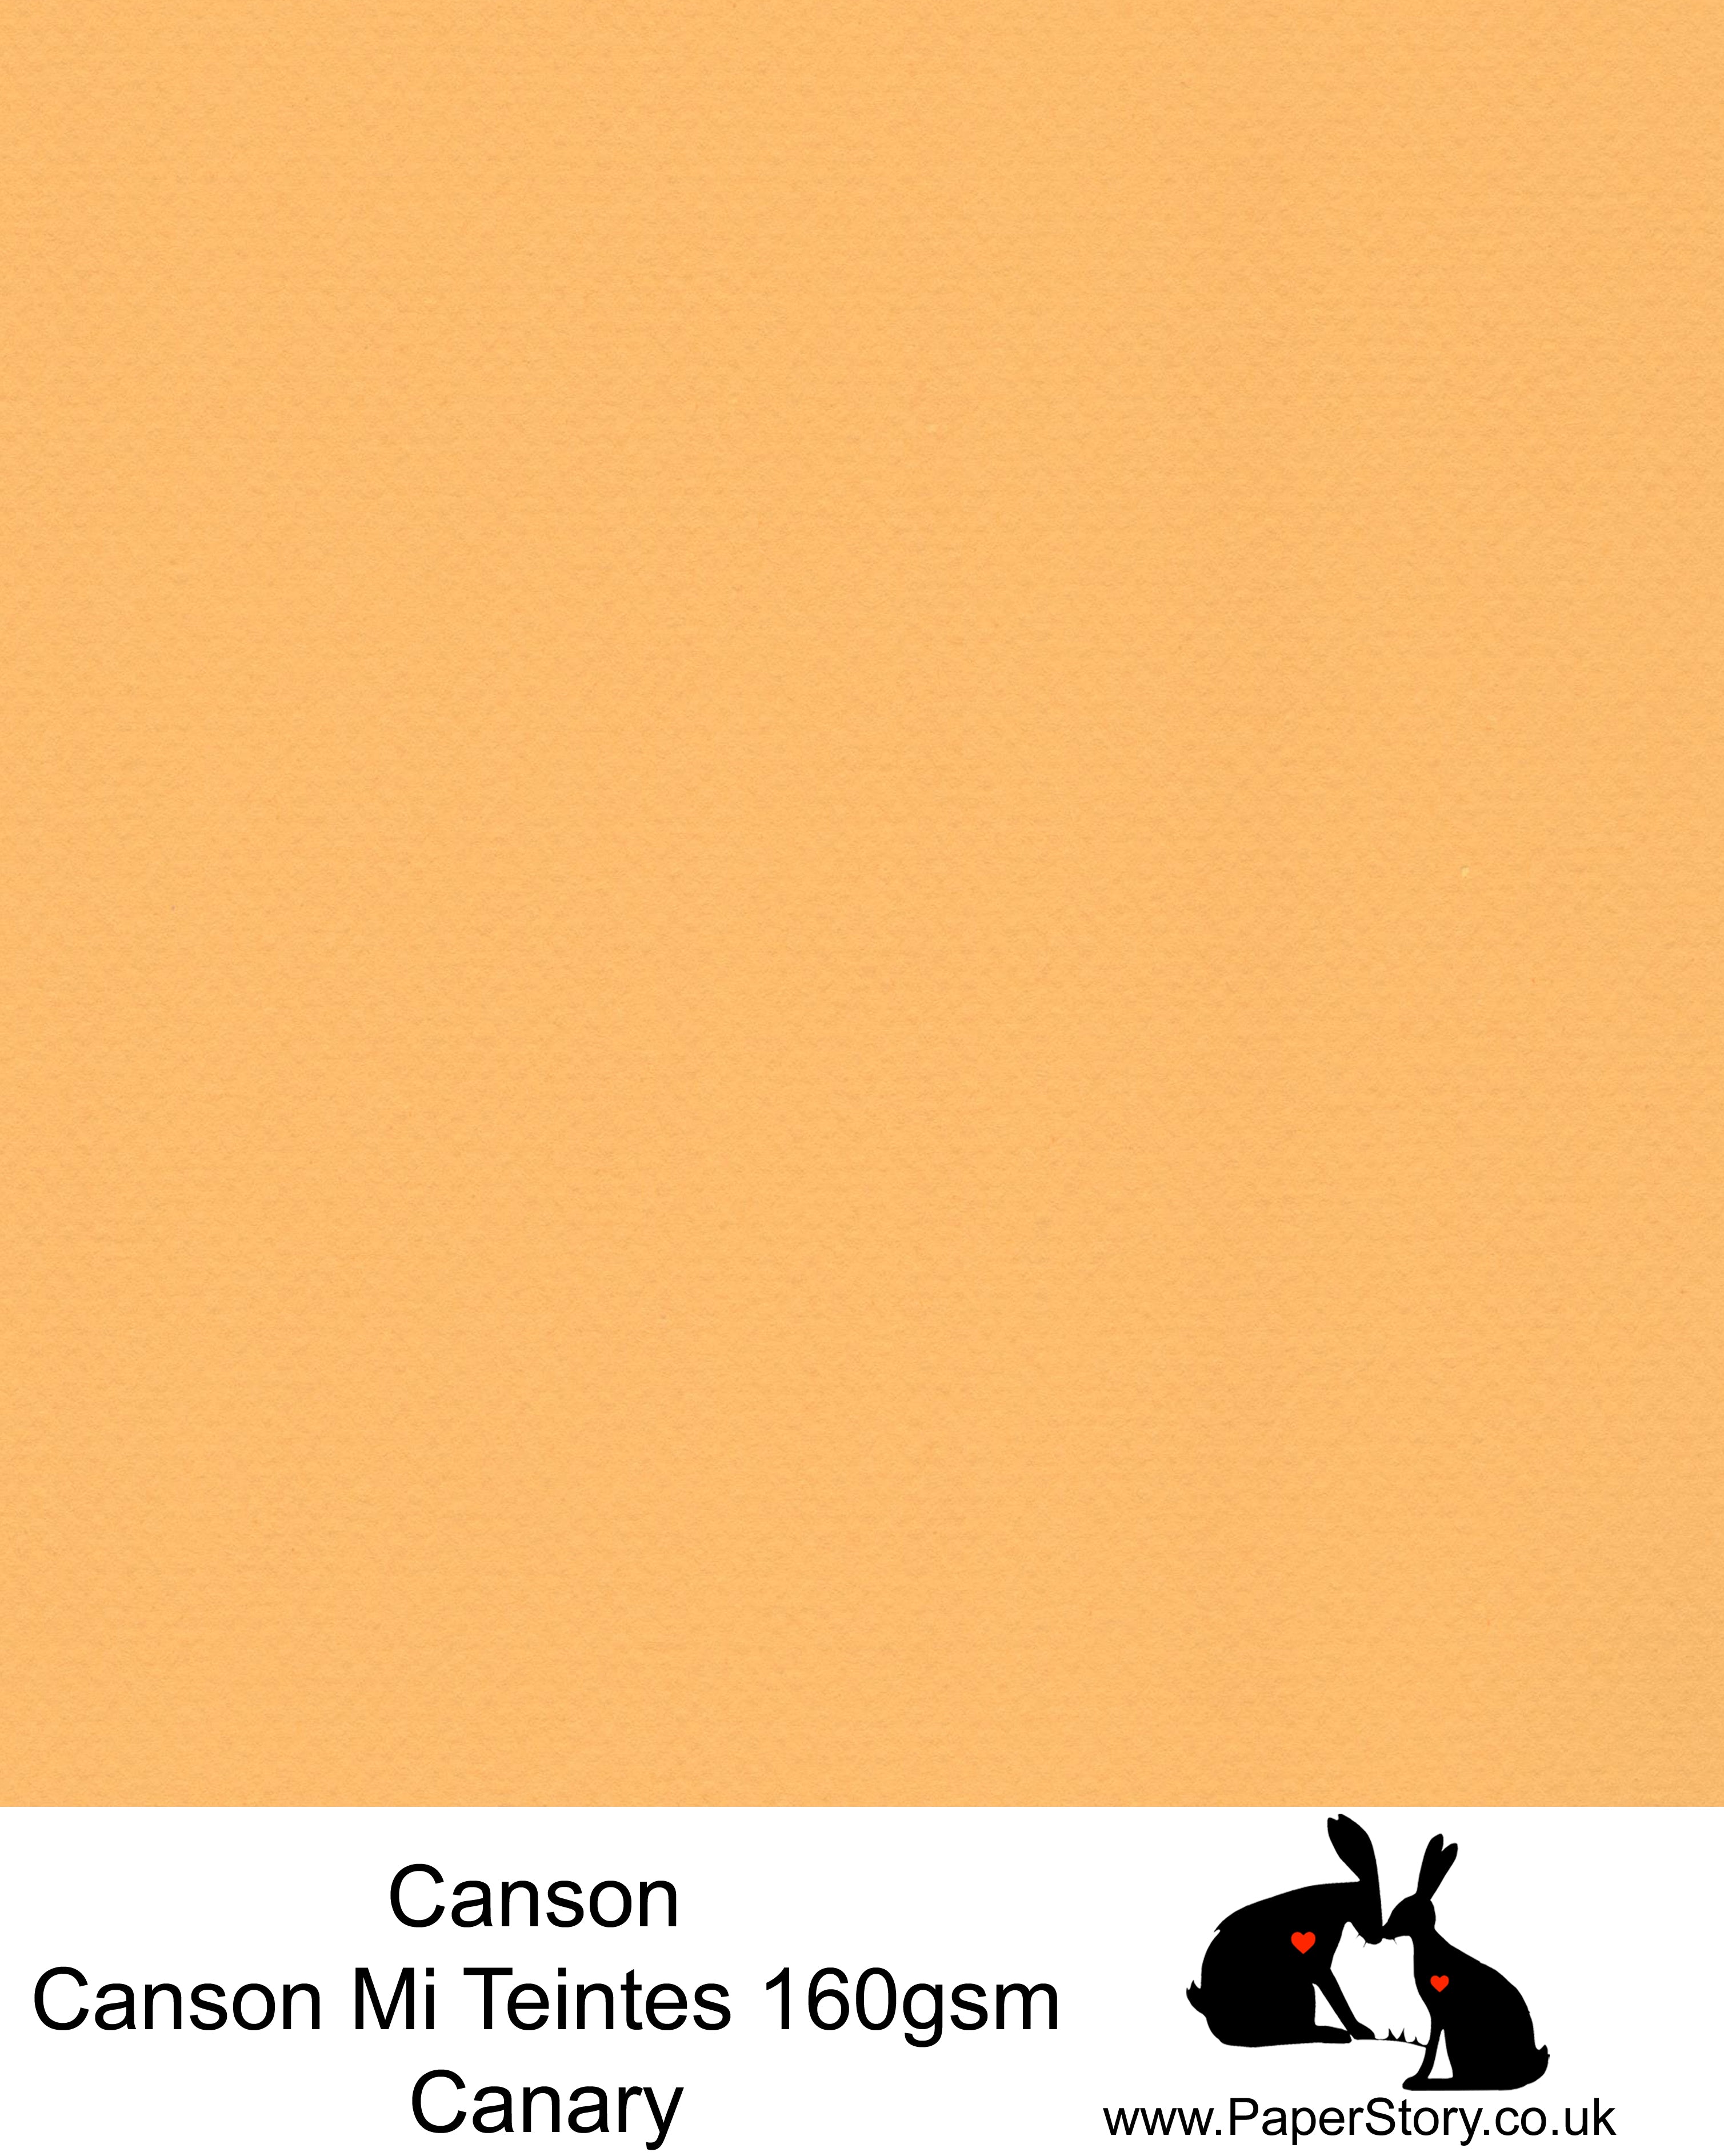 Canson Mi Teintes acid free, Canary warm orange sunset yellow, hammered texture honeycomb surface paper 160 gsm. This is a popular and classic paper for all artists especially well respected for Pastel  and Papercutting made famous by Paper Panda. This paper has a honeycombed finish one side and fine grain the other. An authentic art paper, acid free with a  very high 50% cotton content. Canson Mi-Teintes complies with the ISO 9706 standard on permanence, a guarantee of excellent conservation  